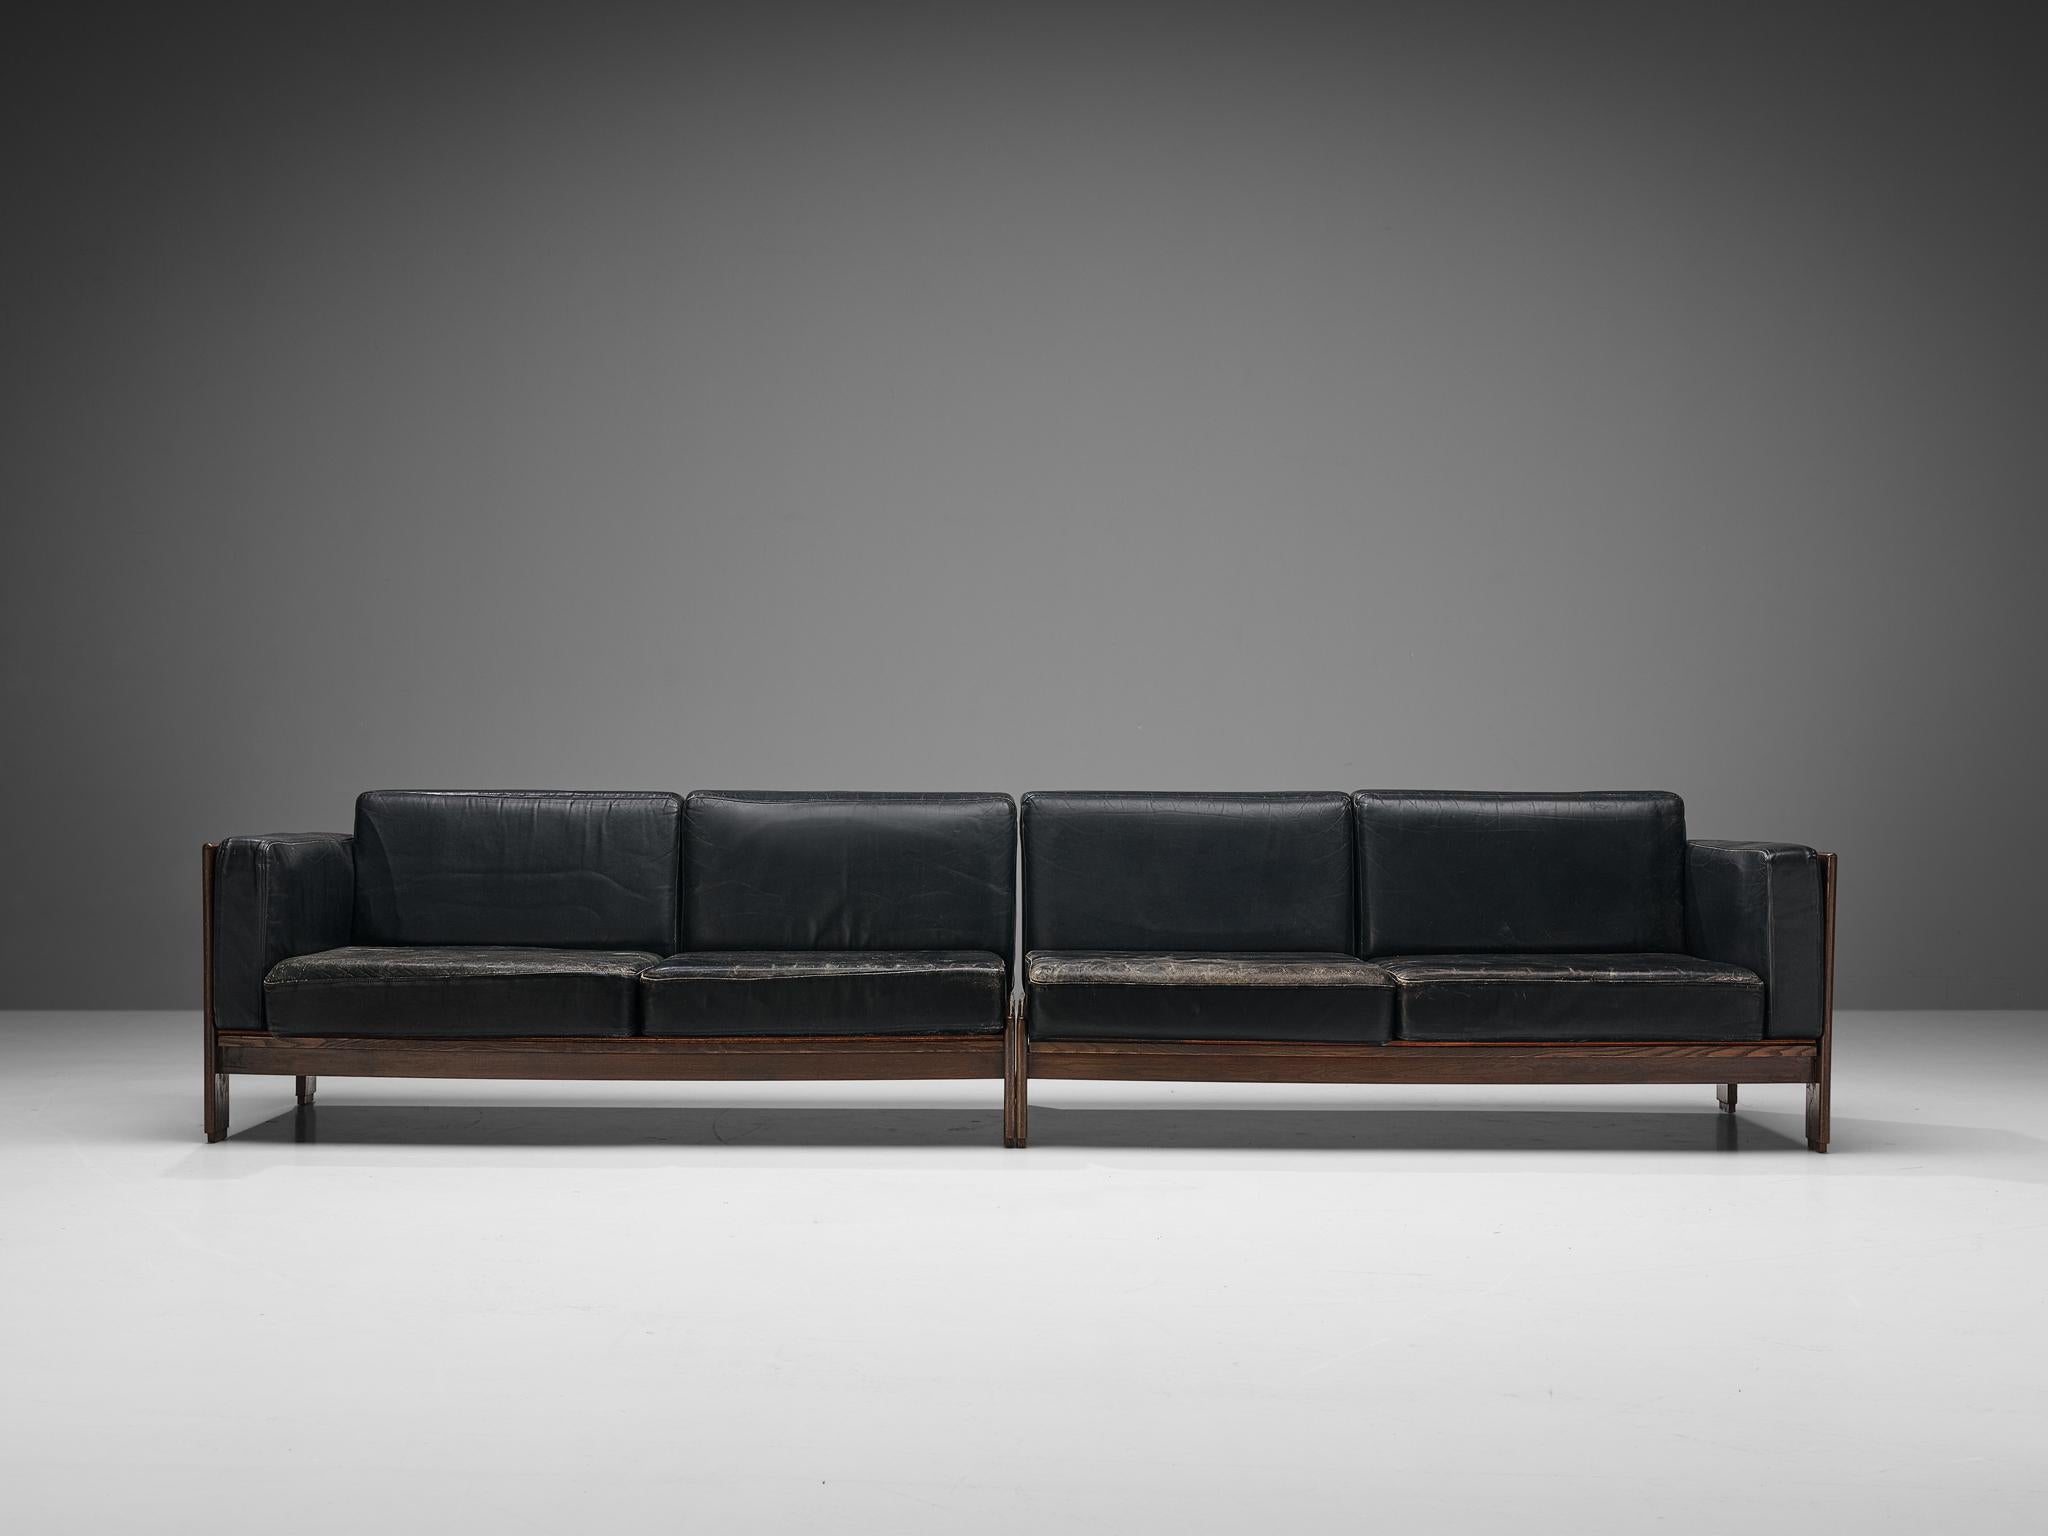 Late 20th Century Italian Mid-Century Modern Sofa in Ash and Black Leather  For Sale